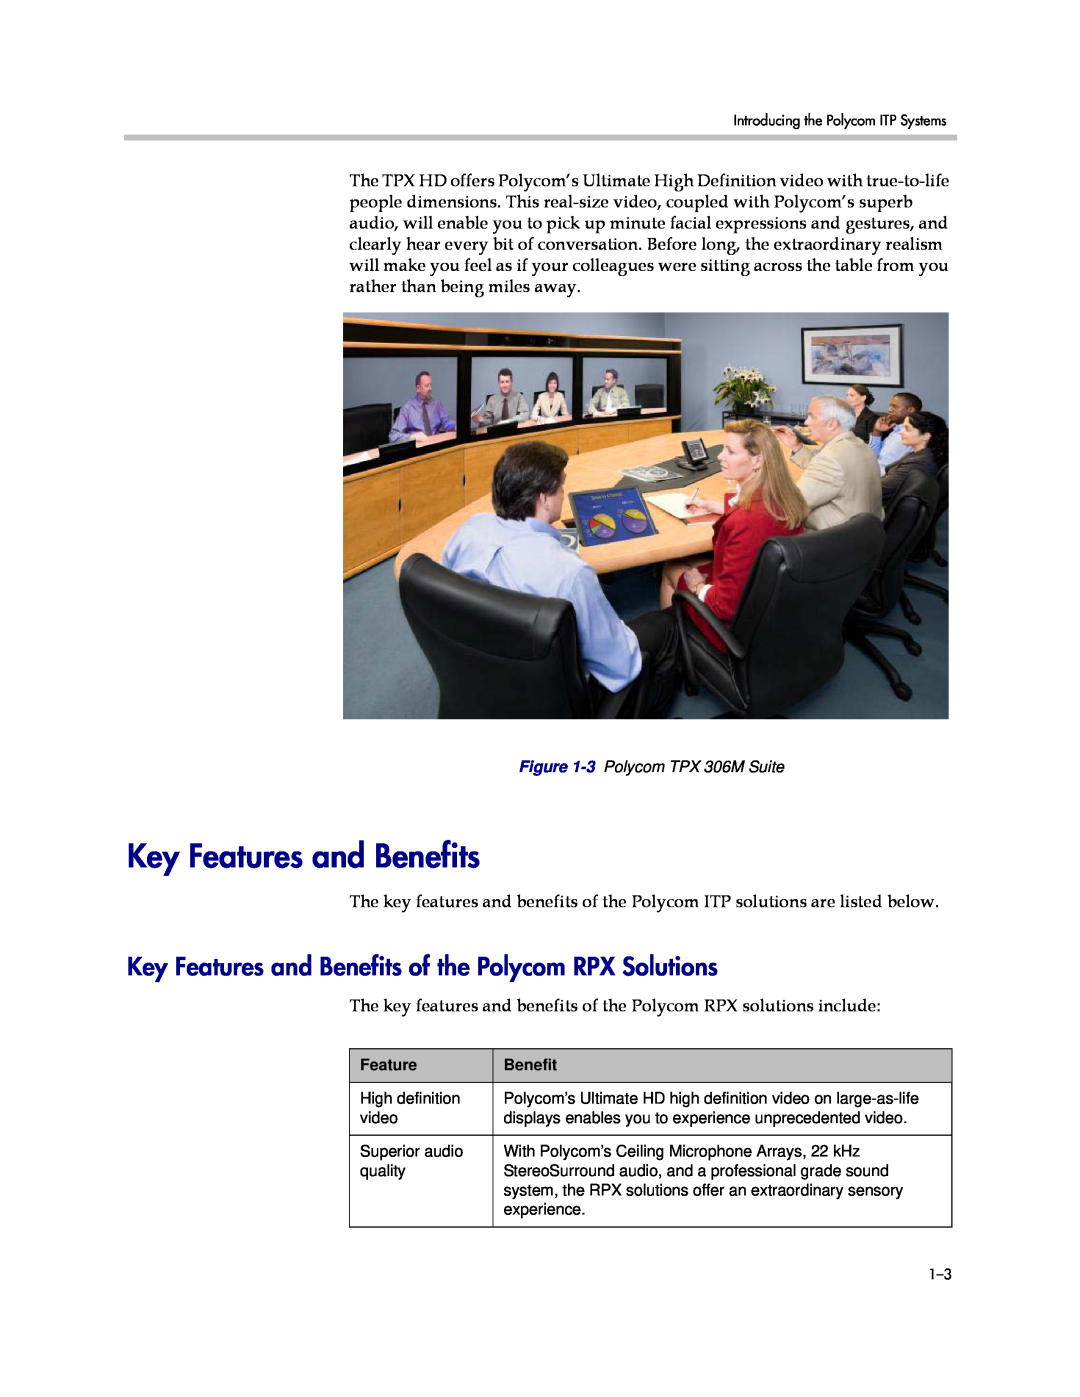 Polycom 3725-63211-002, A manual Key Features and Benefits of the Polycom RPX Solutions 